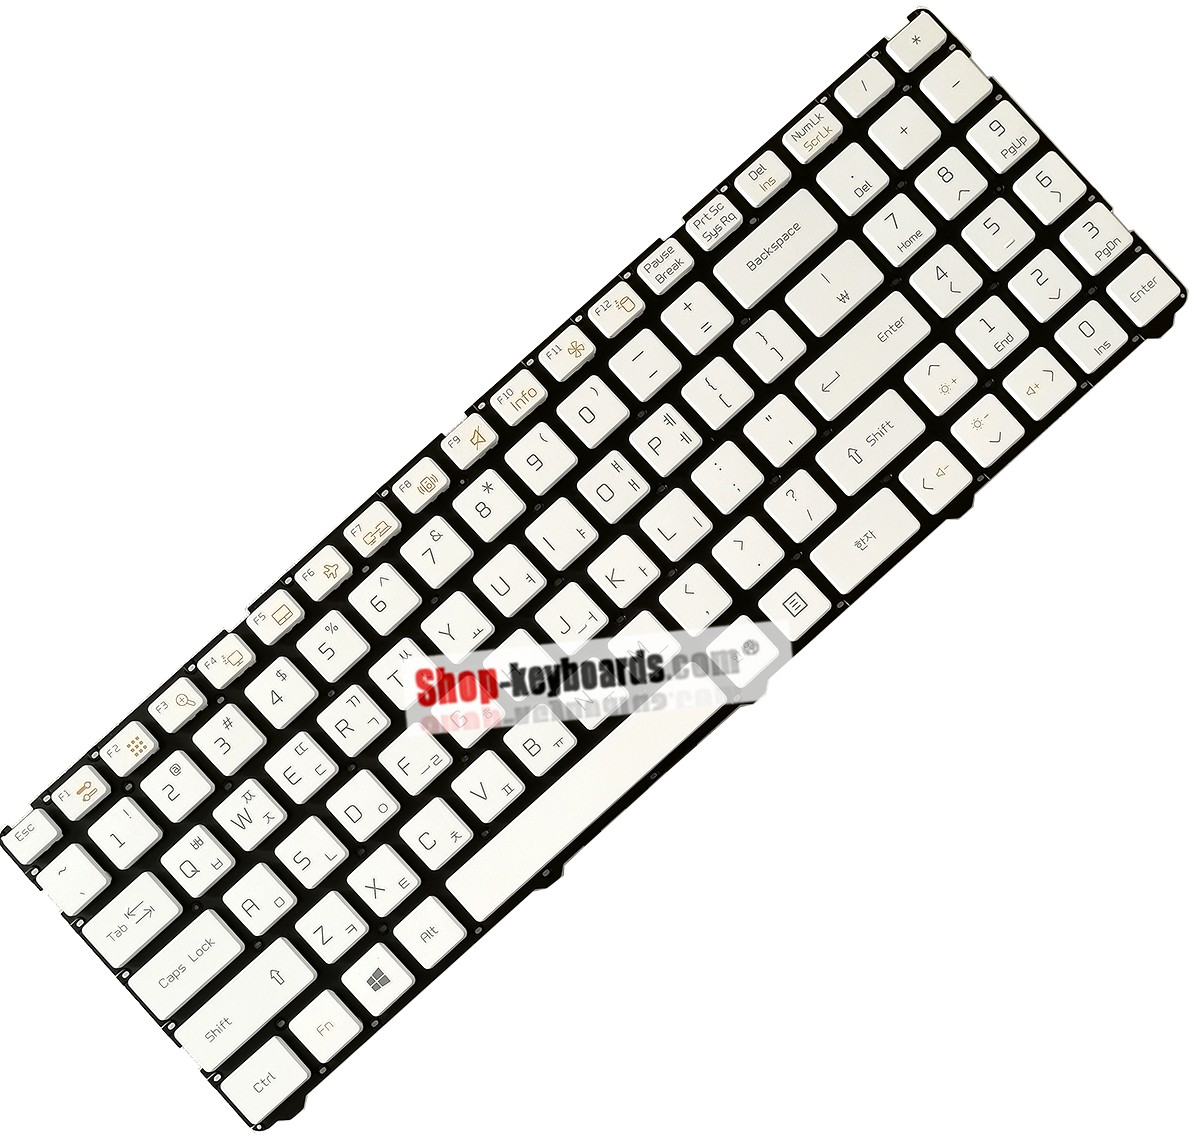 LG MP-12K73A0-9208 Keyboard replacement